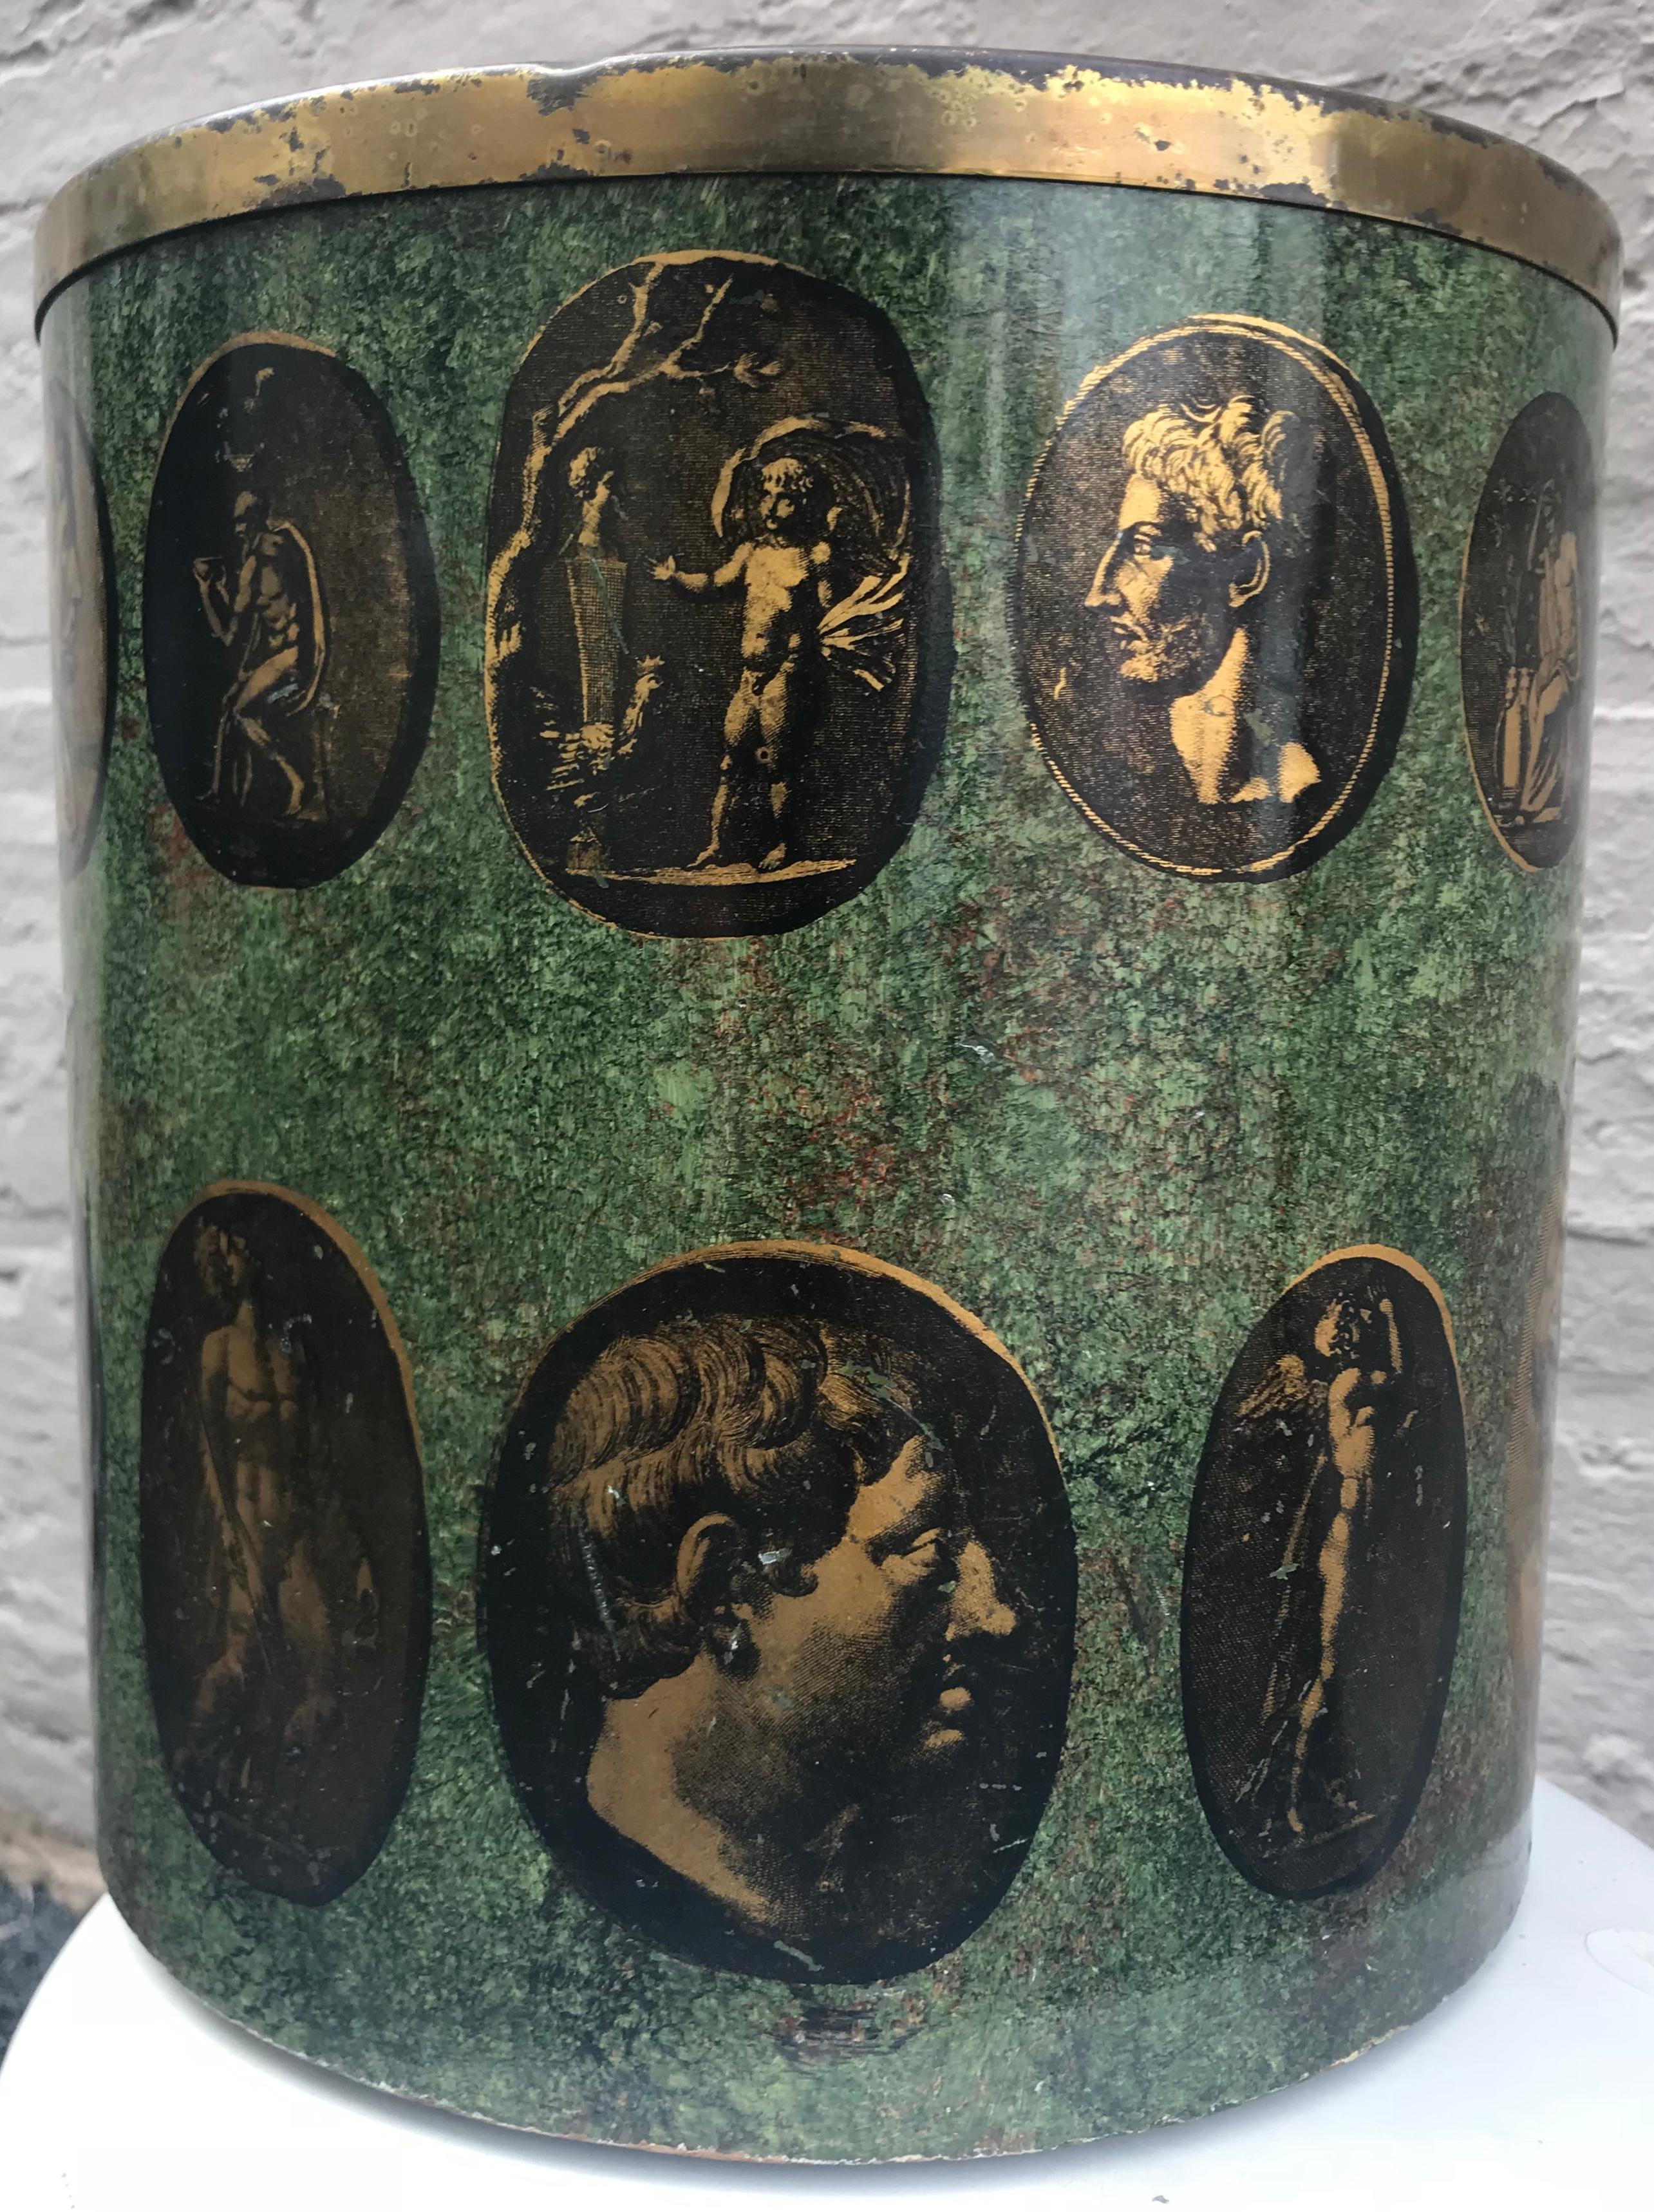 Wonderful and rare early production Fornasetti wastebasket from the early 1950s with lithographed classical images and green faux marble decoration. Wonderful wear to surface.